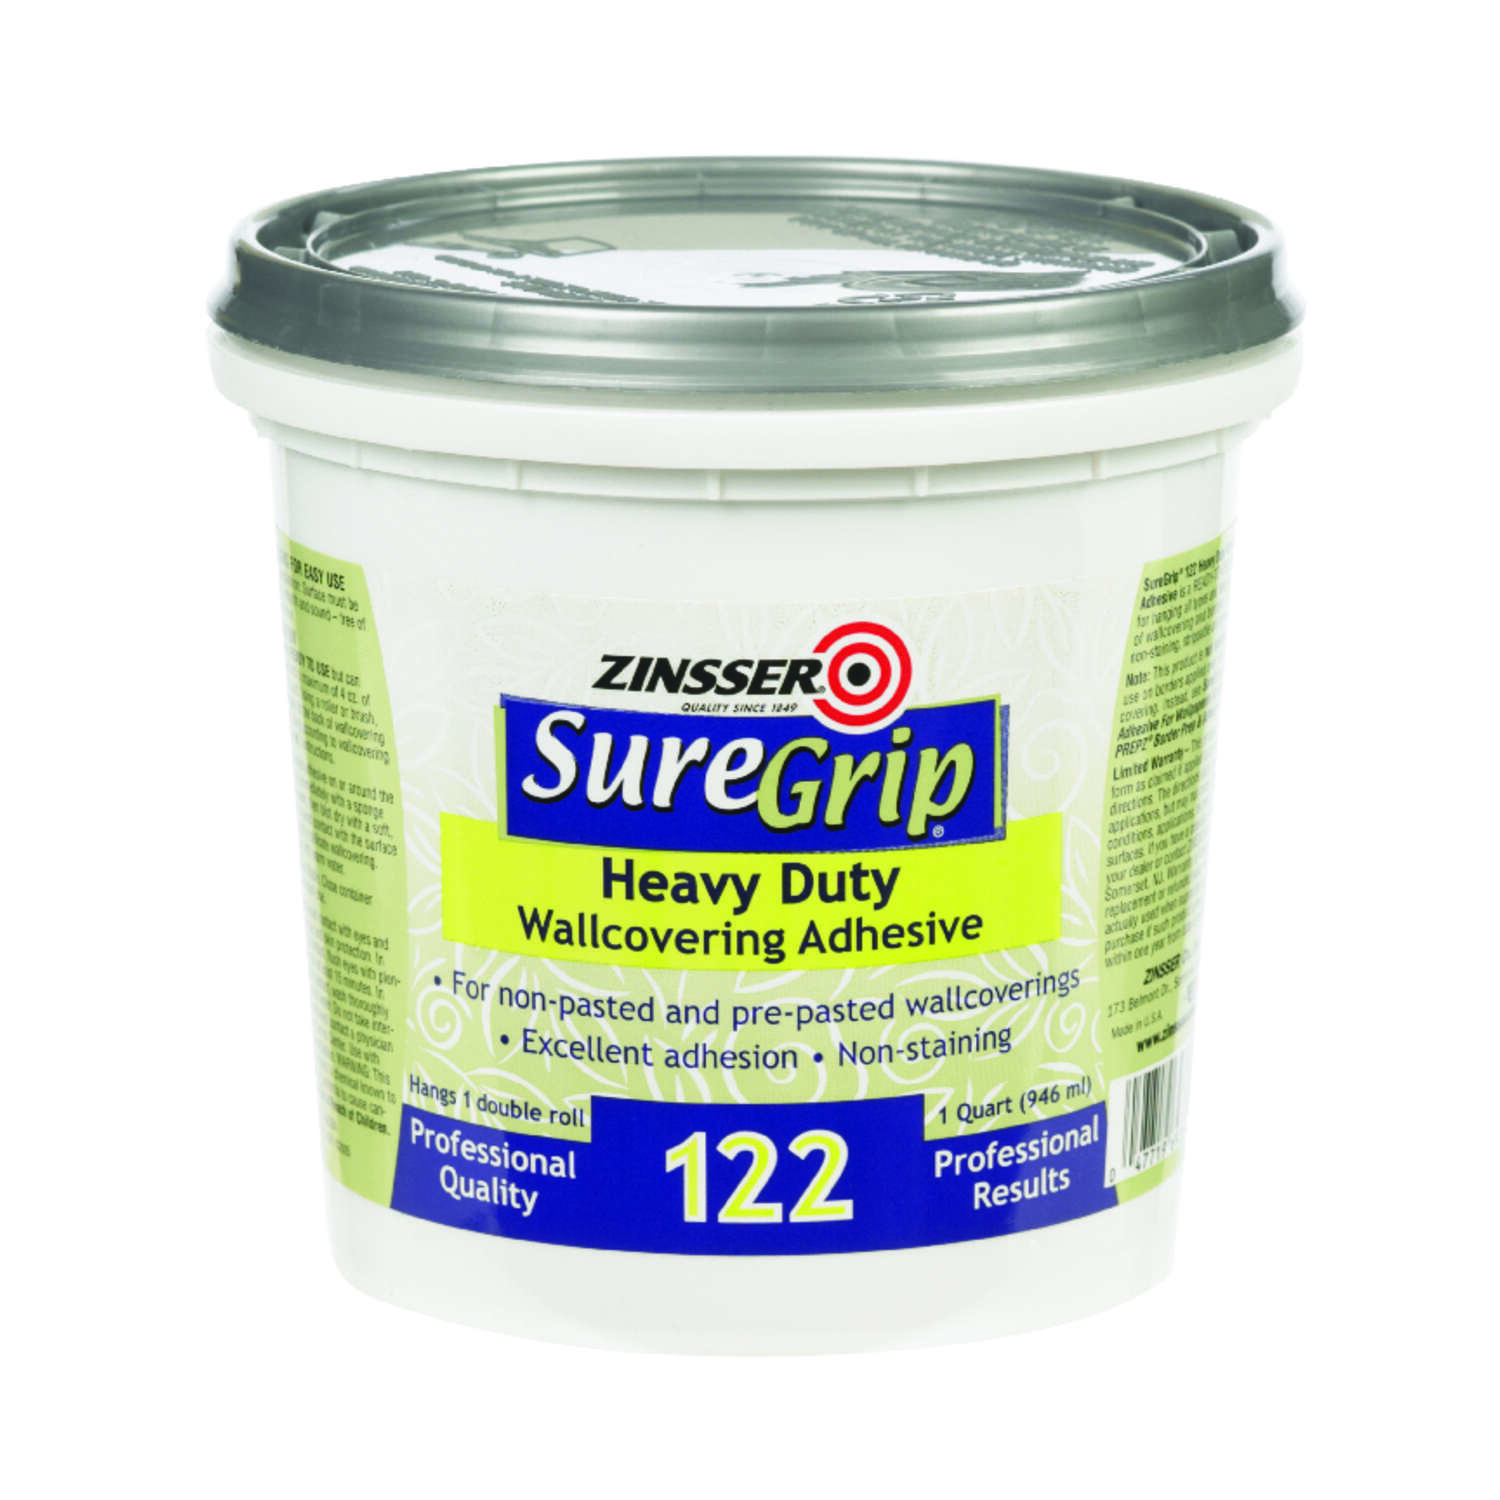 Zinsser SureGrip High Strength Wallcovering Adhesive 1 qt - Ace Hardware